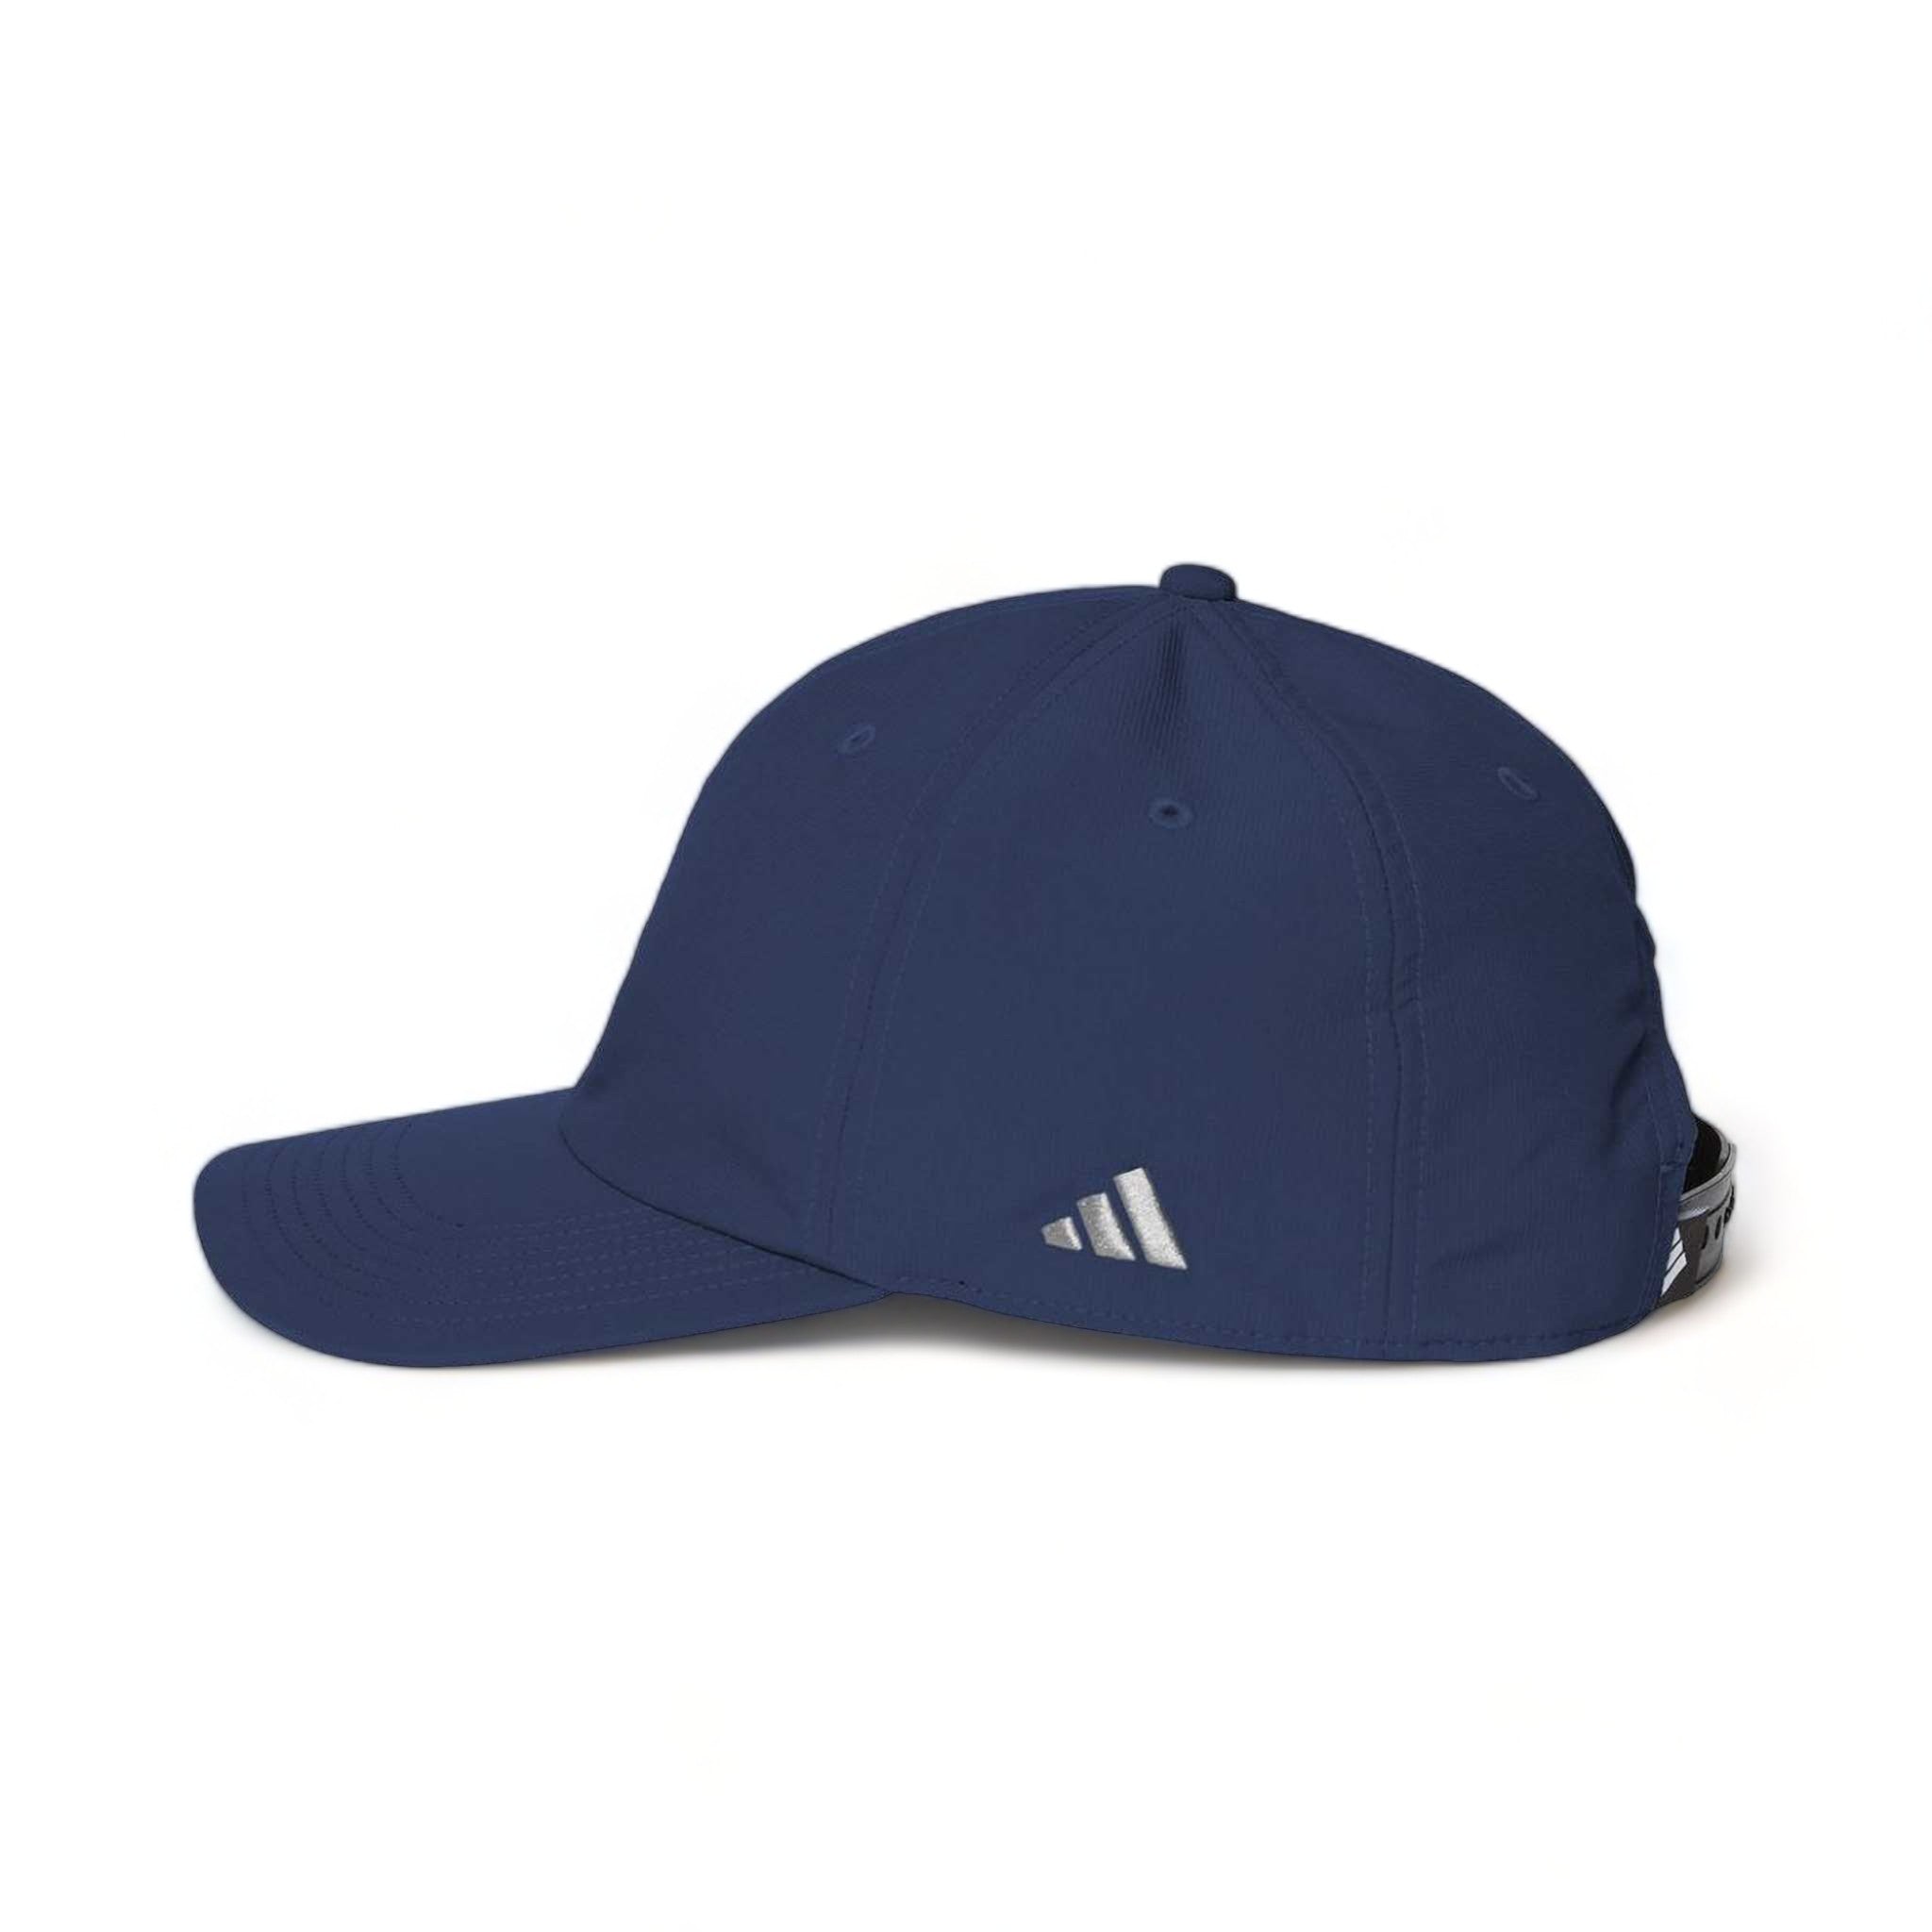 Side view of Adidas A605S custom hat in collegiate navy